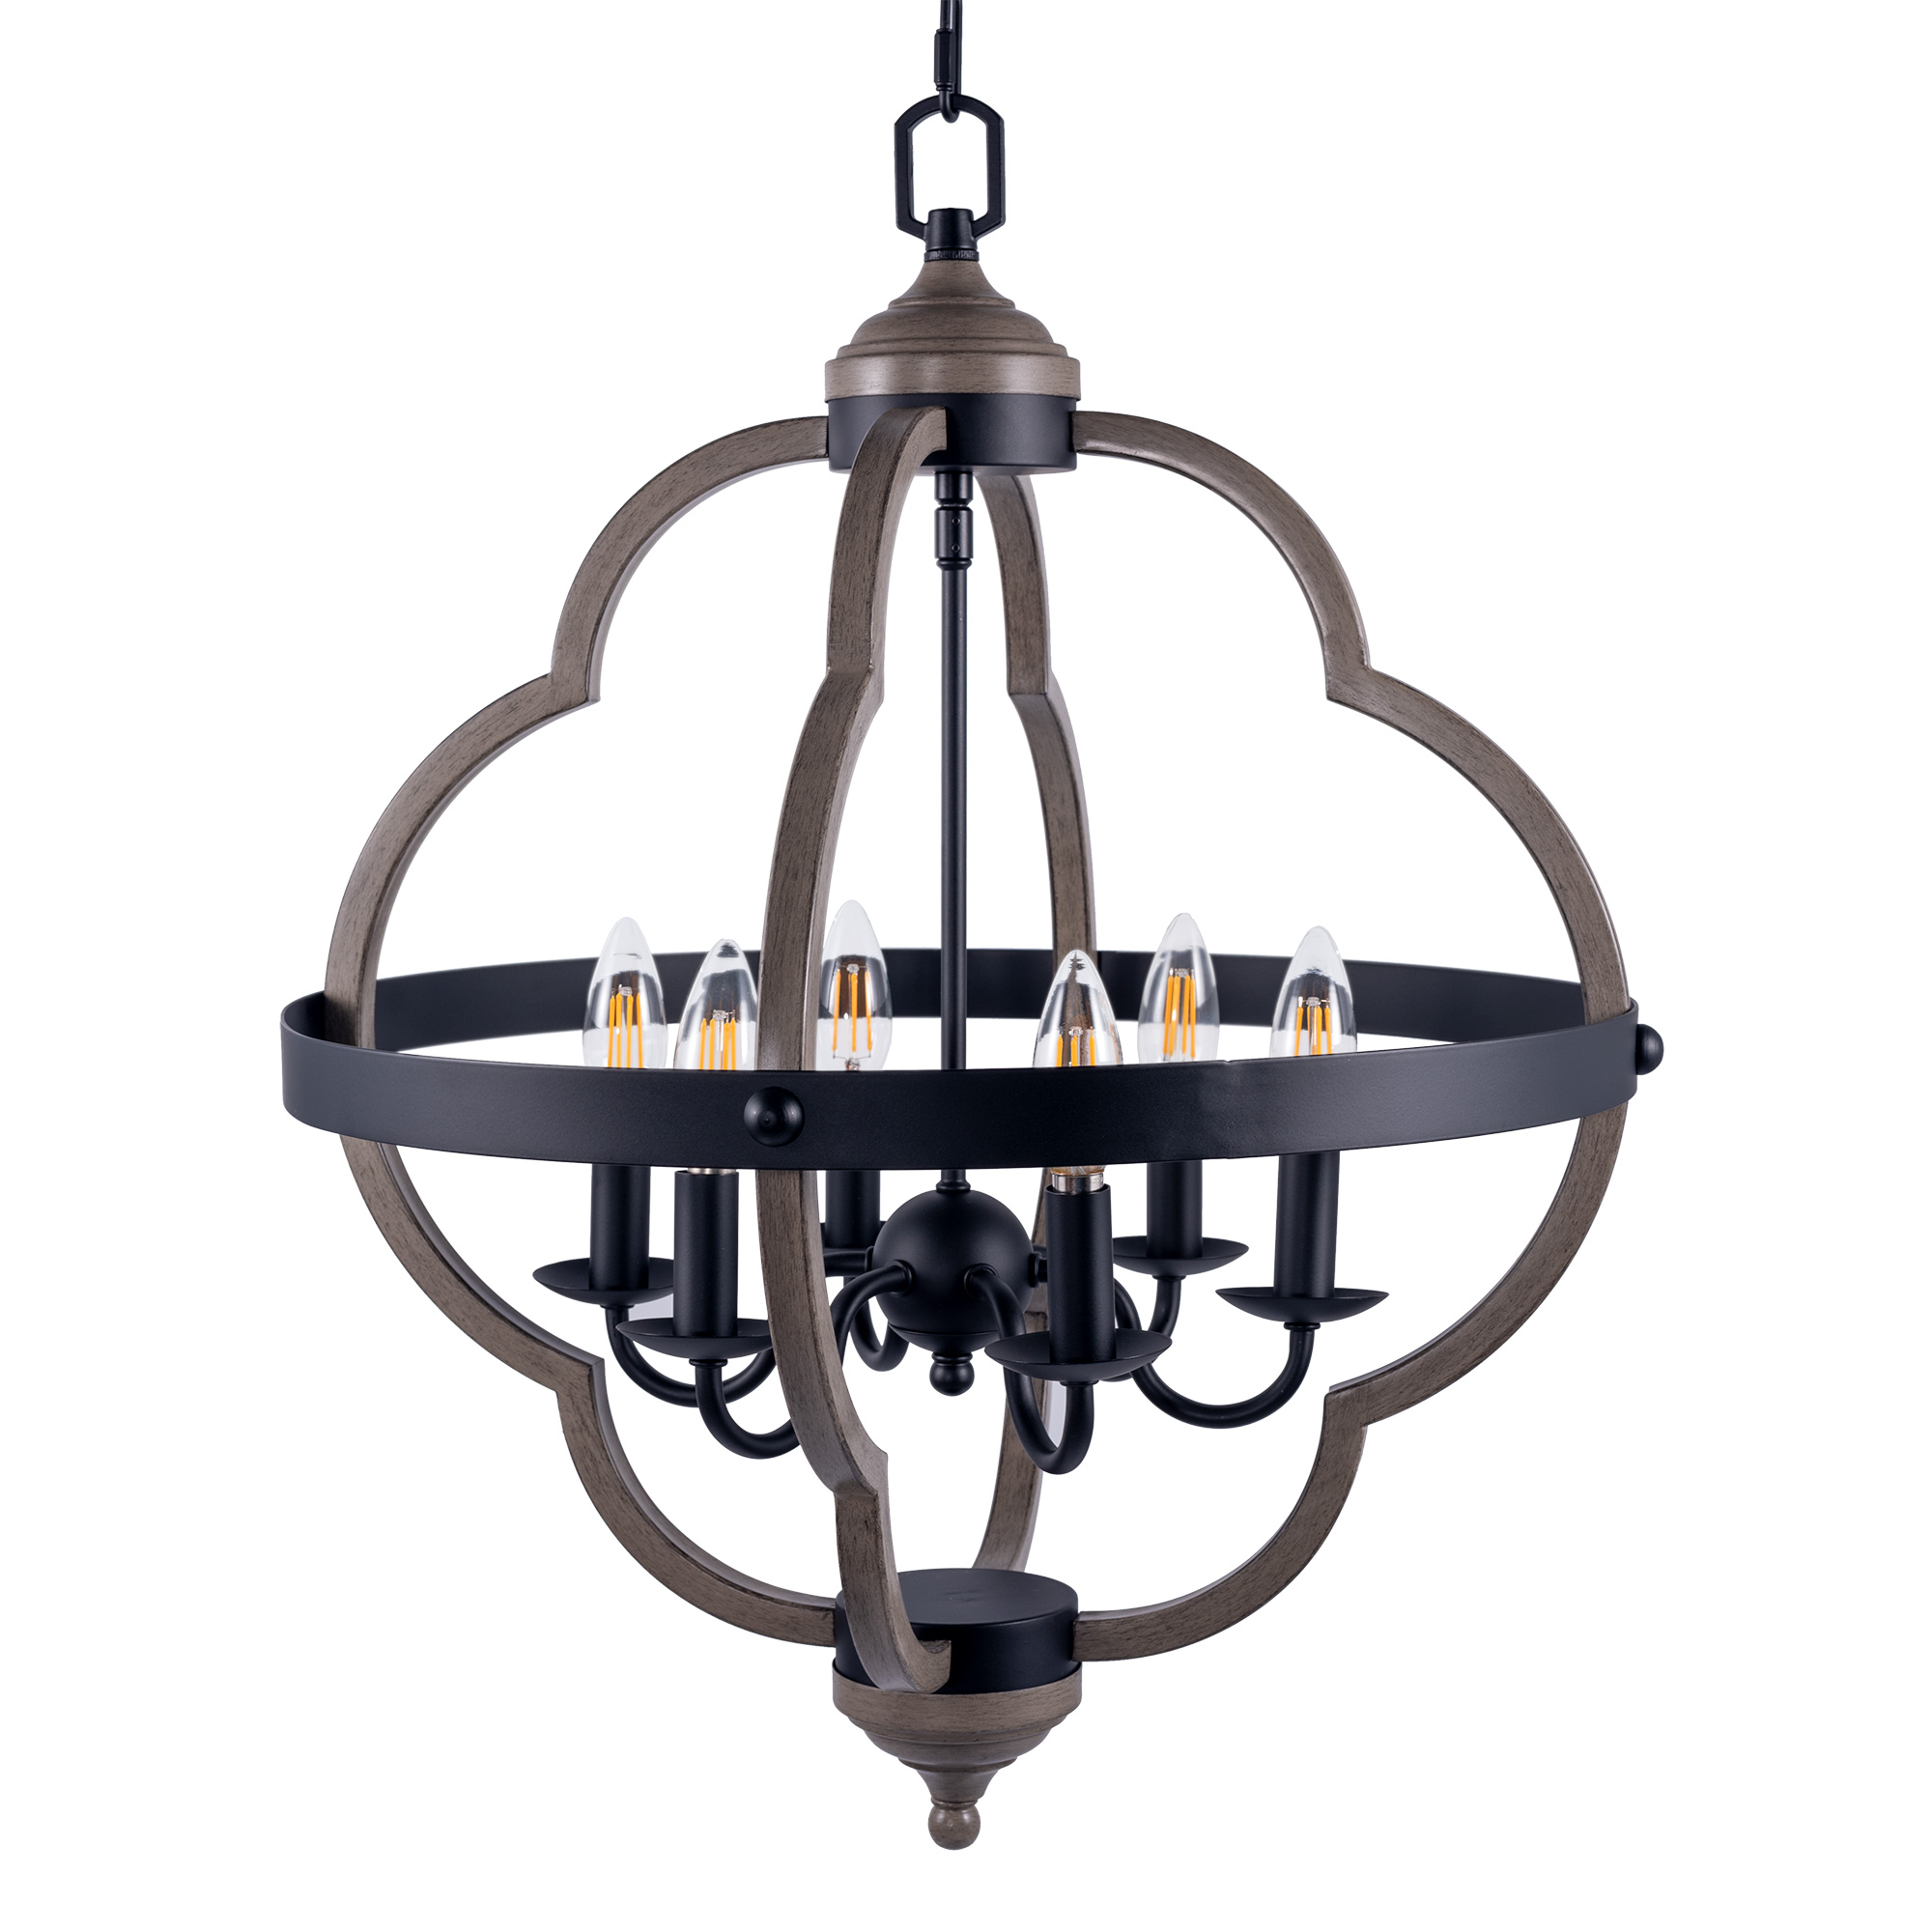 USA-Direct-6-Light-Candle-Style-Geometric-Chandelier-Industrial-Rustic-Indoor-Pendant-Light-Without--1877127-4